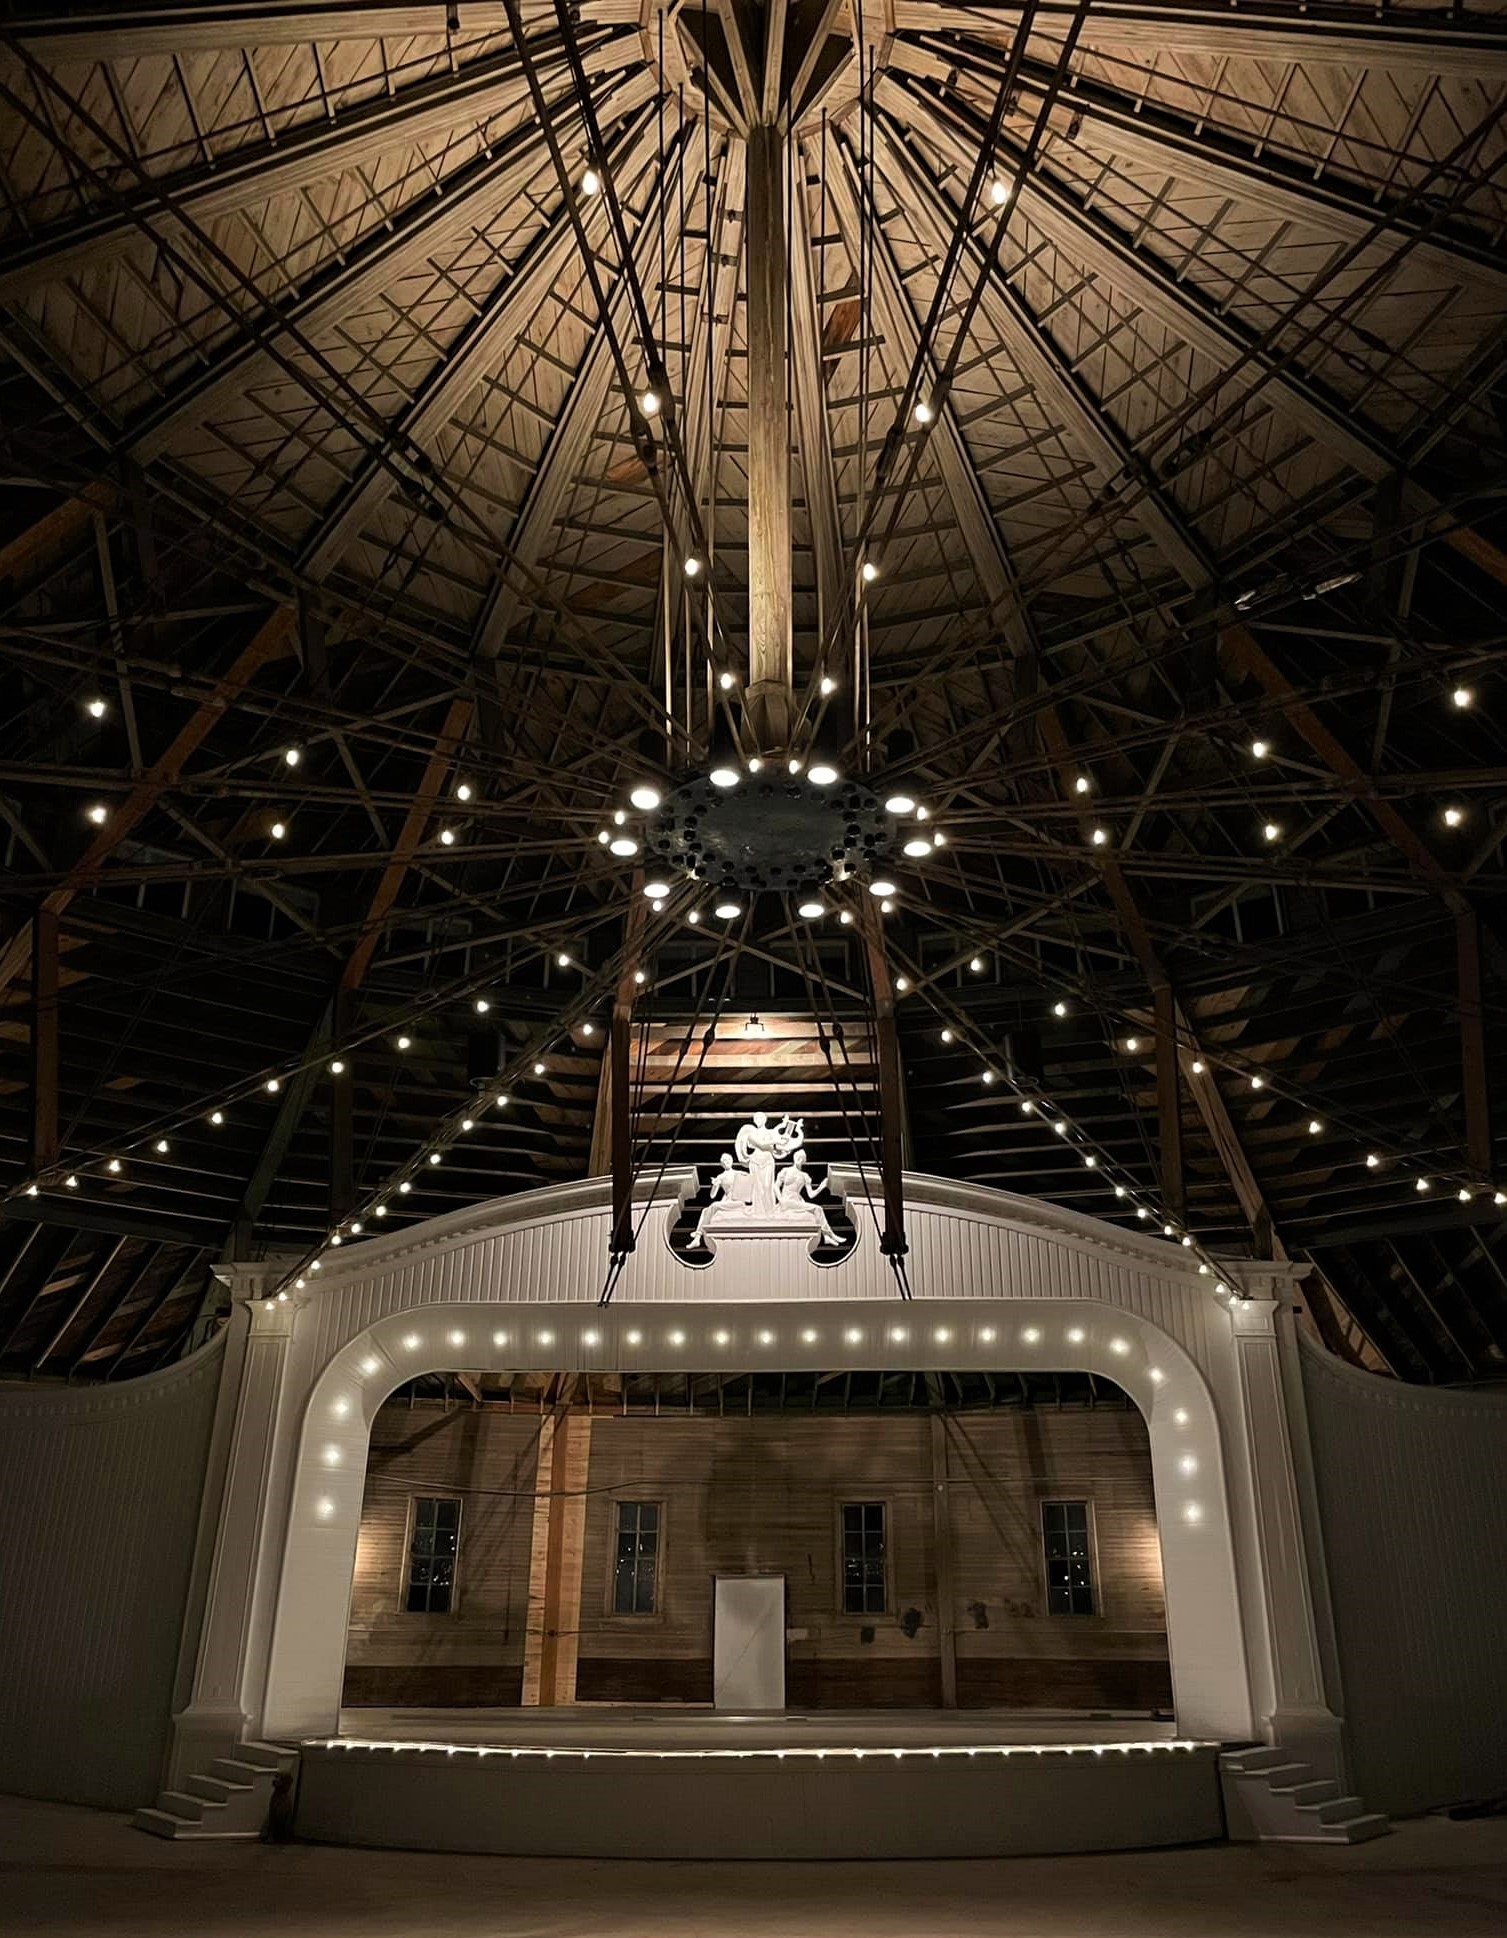 Photograph of radial trusses supporting Shelbyville Chautauqua Auditorium ceiling.